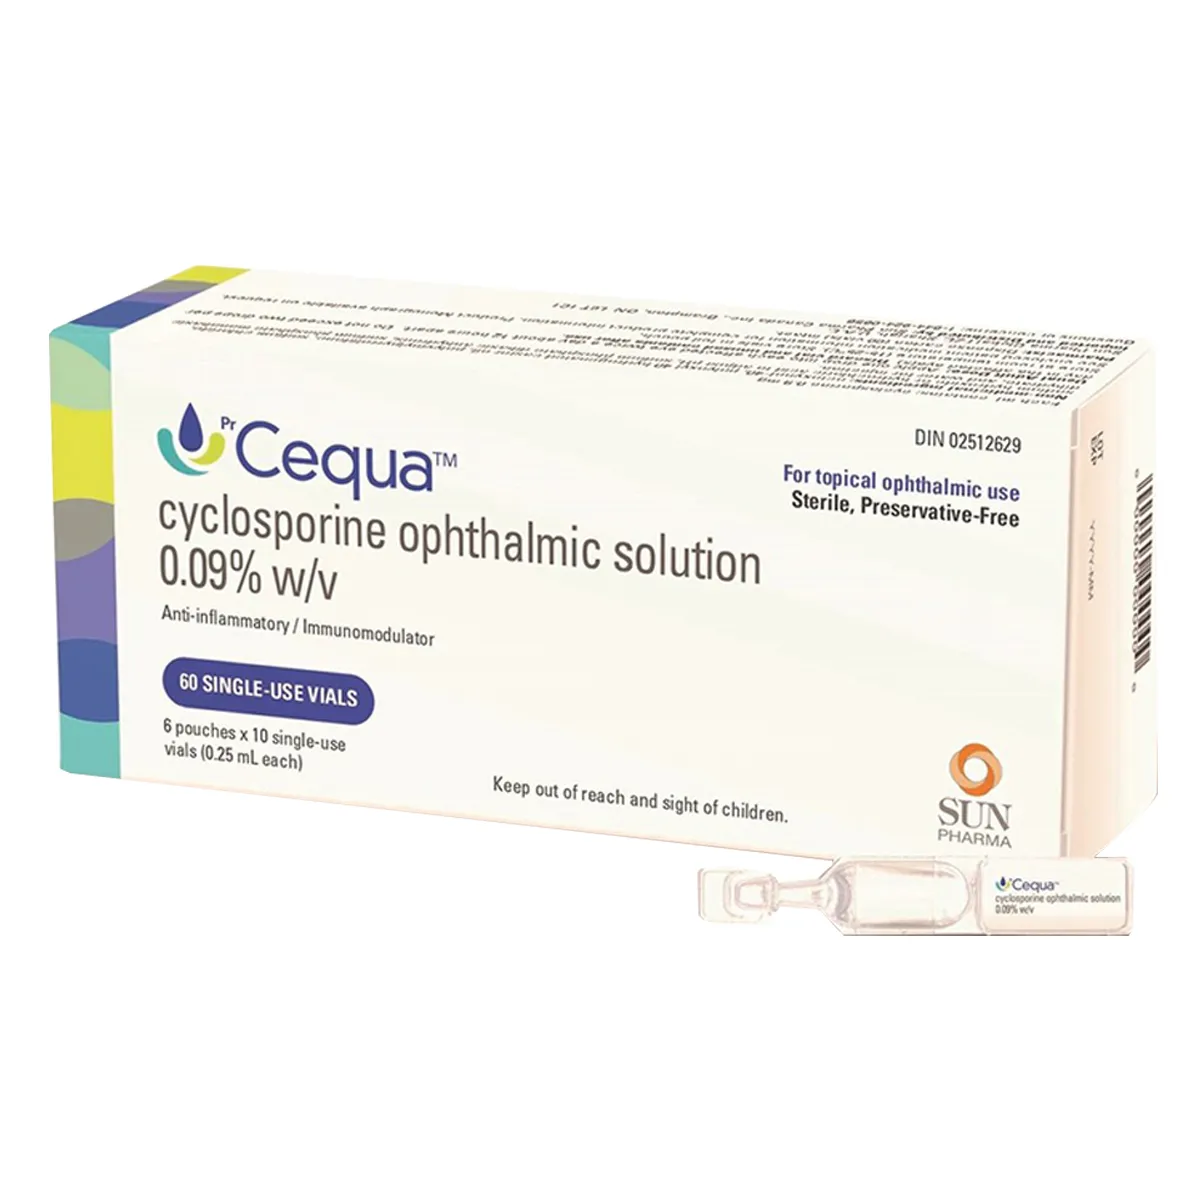 Cequa Ophthalmic Solution (0.25ml Each)